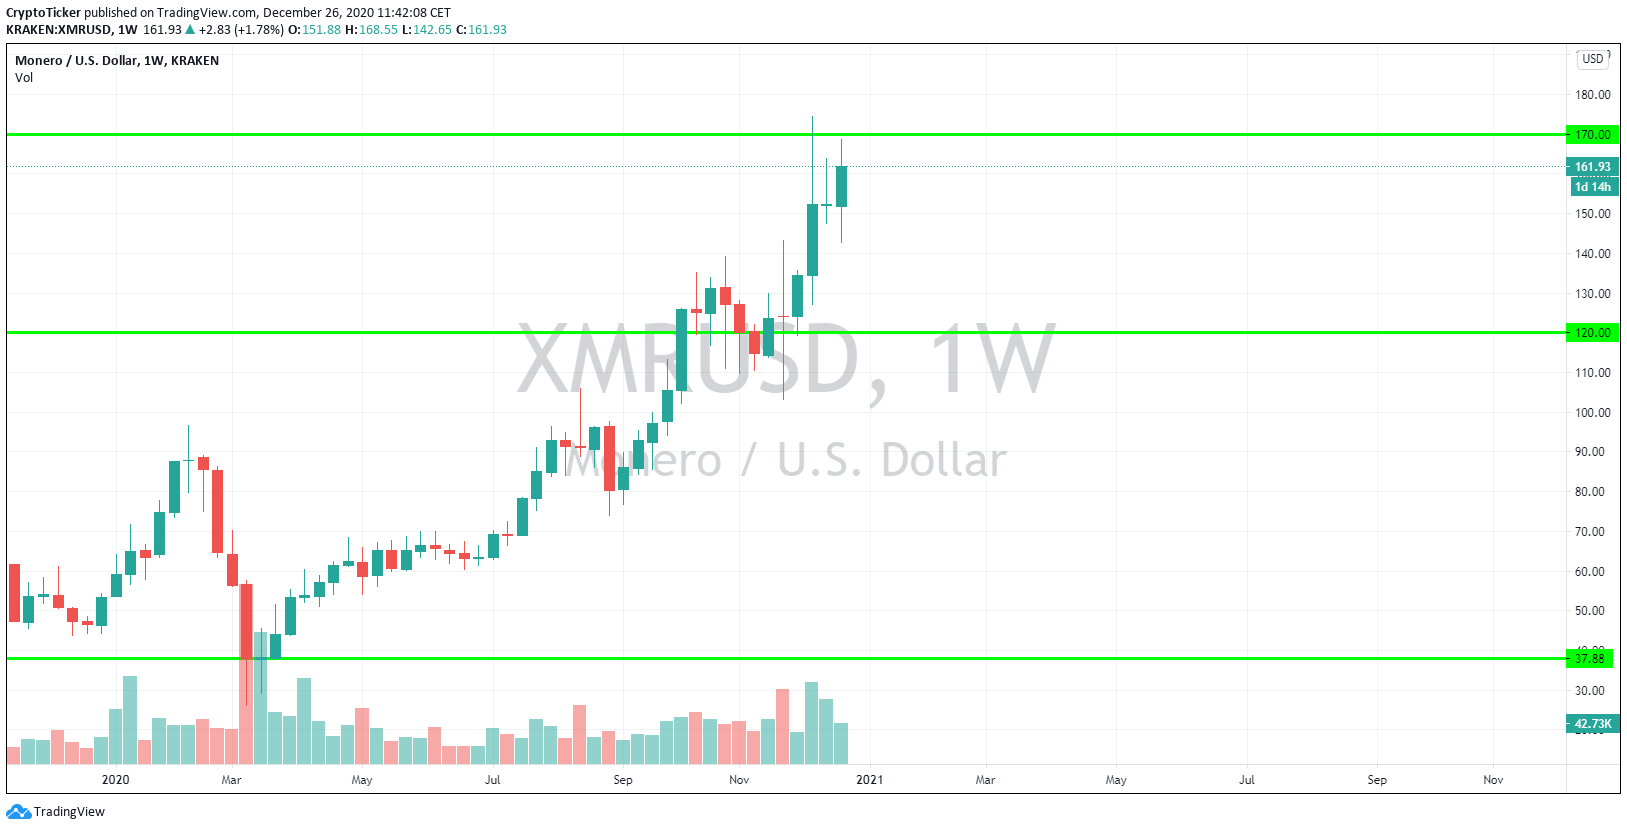 XMR/USD 1-Week chart, price reaching USD 170 area as projected 